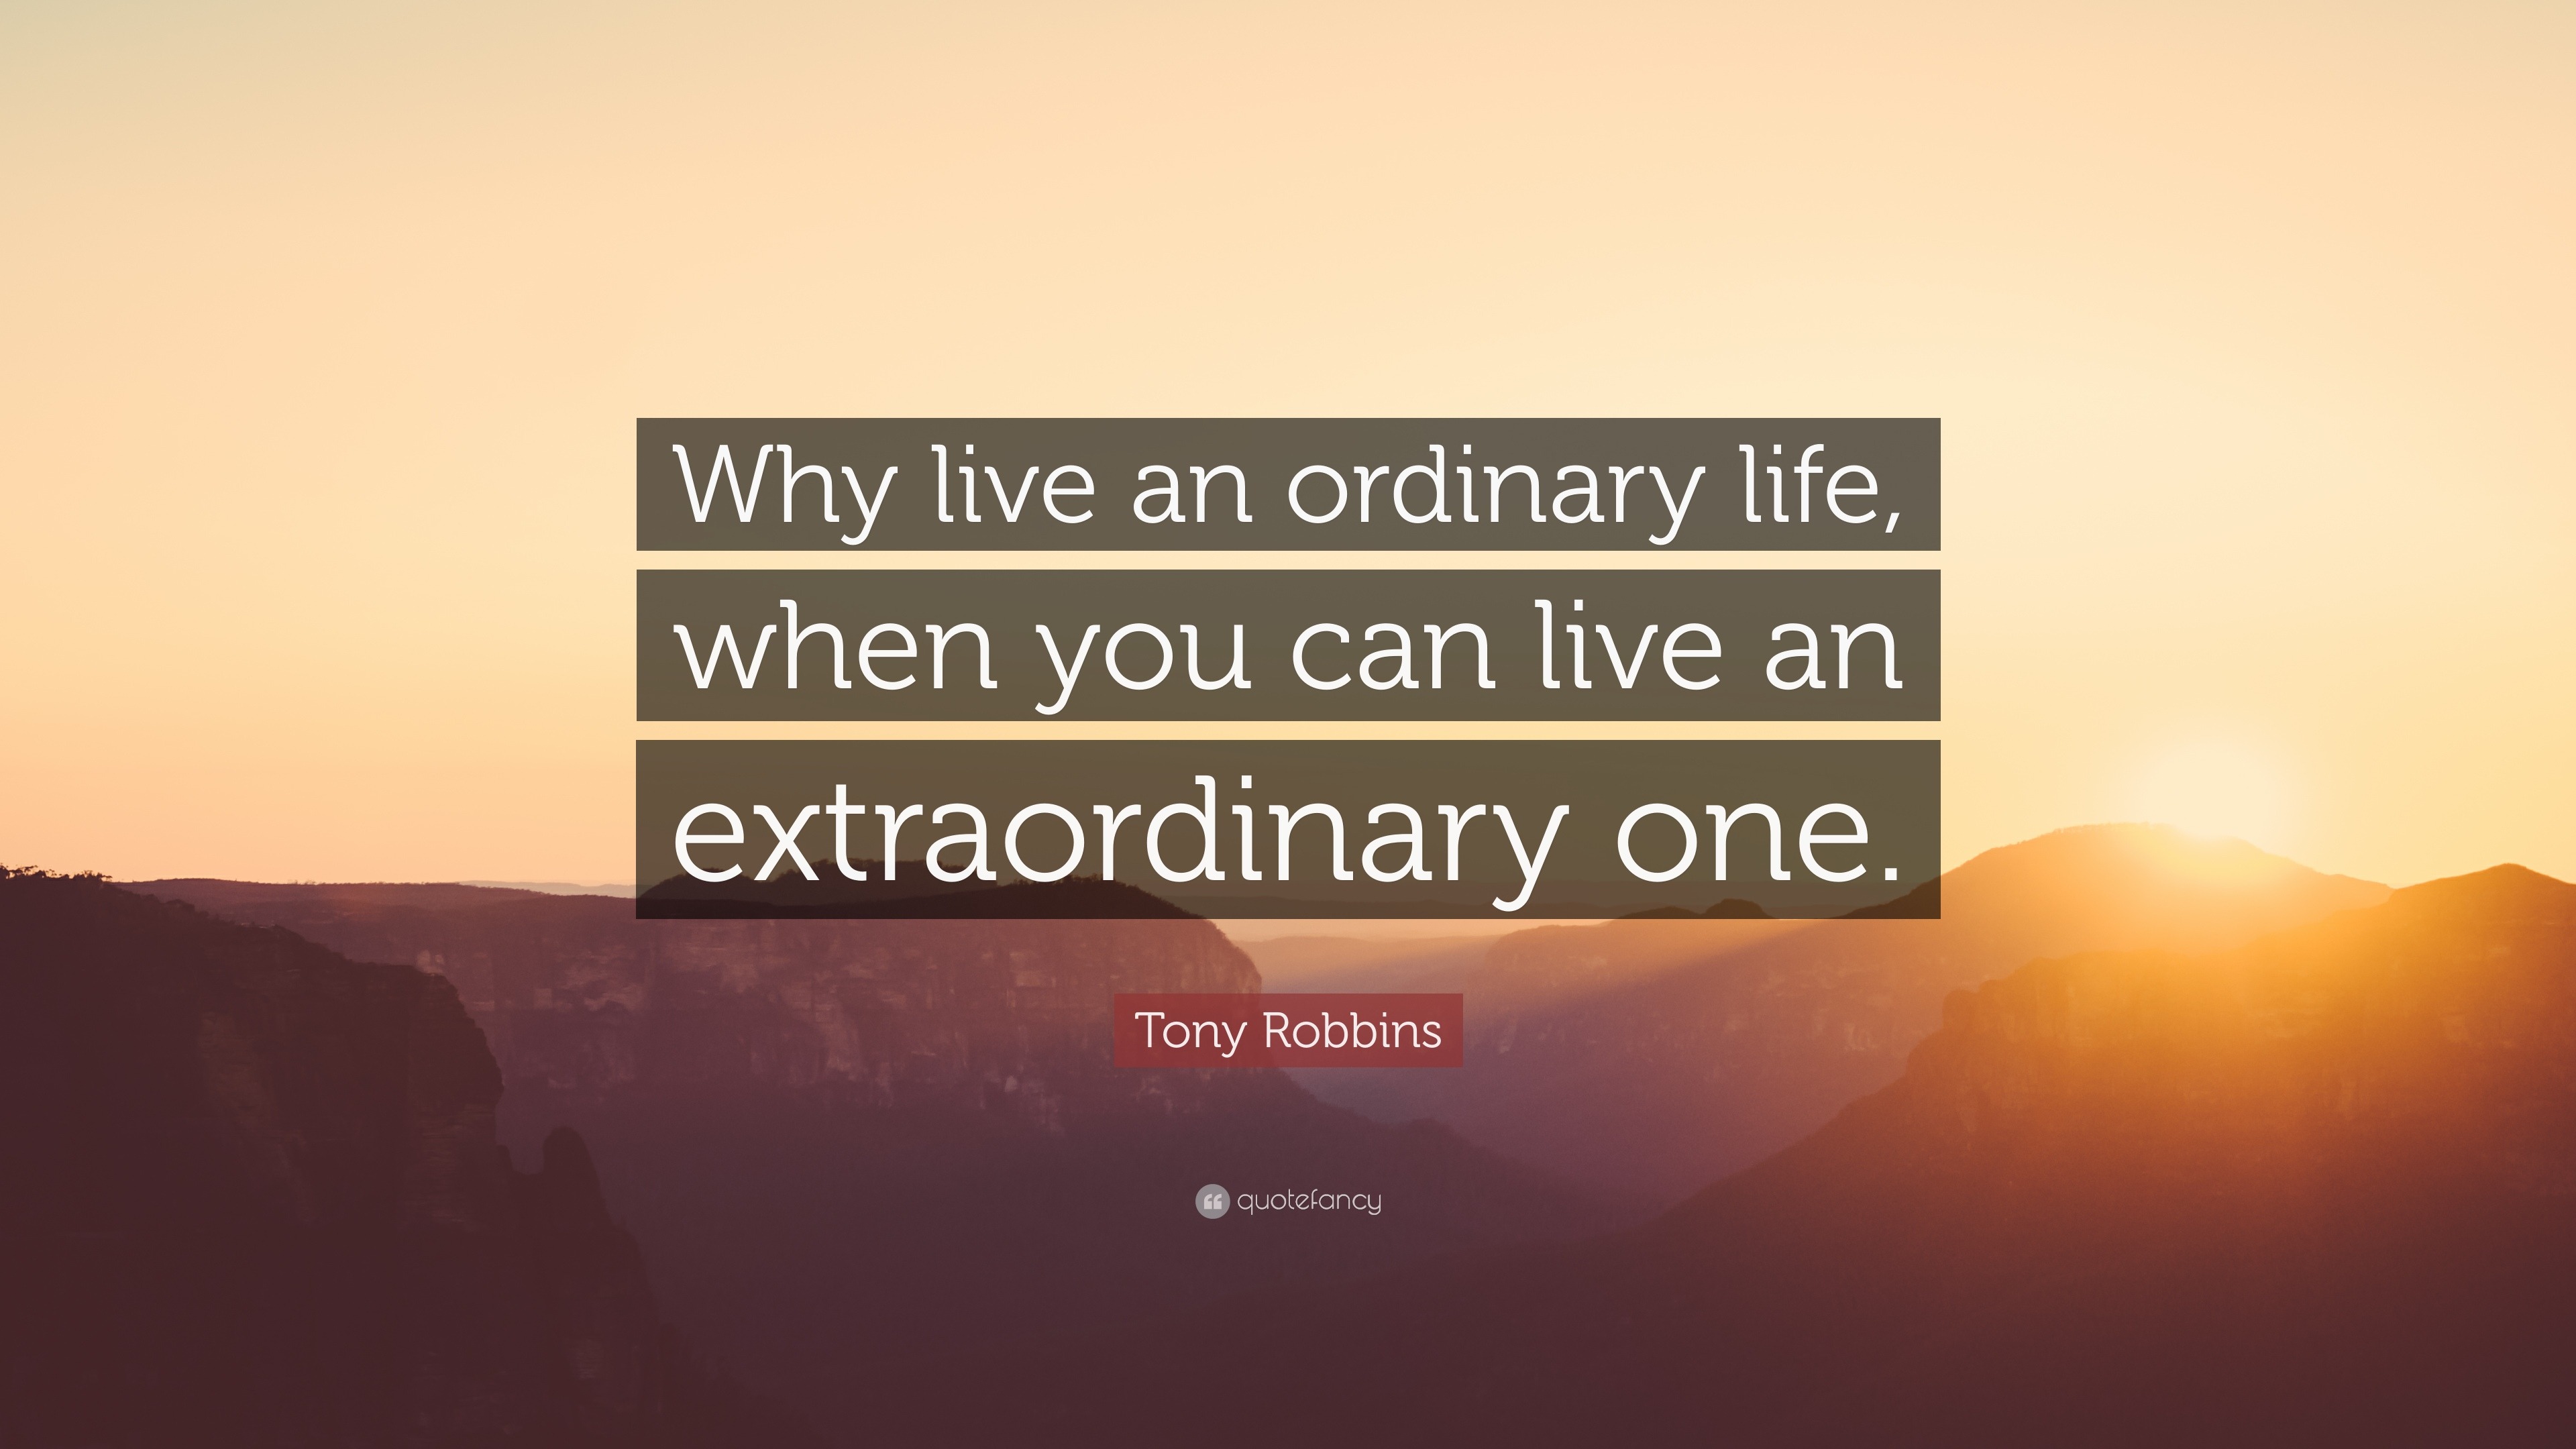 Tony Robbins Quote “Why live an ordinary life when you can live an